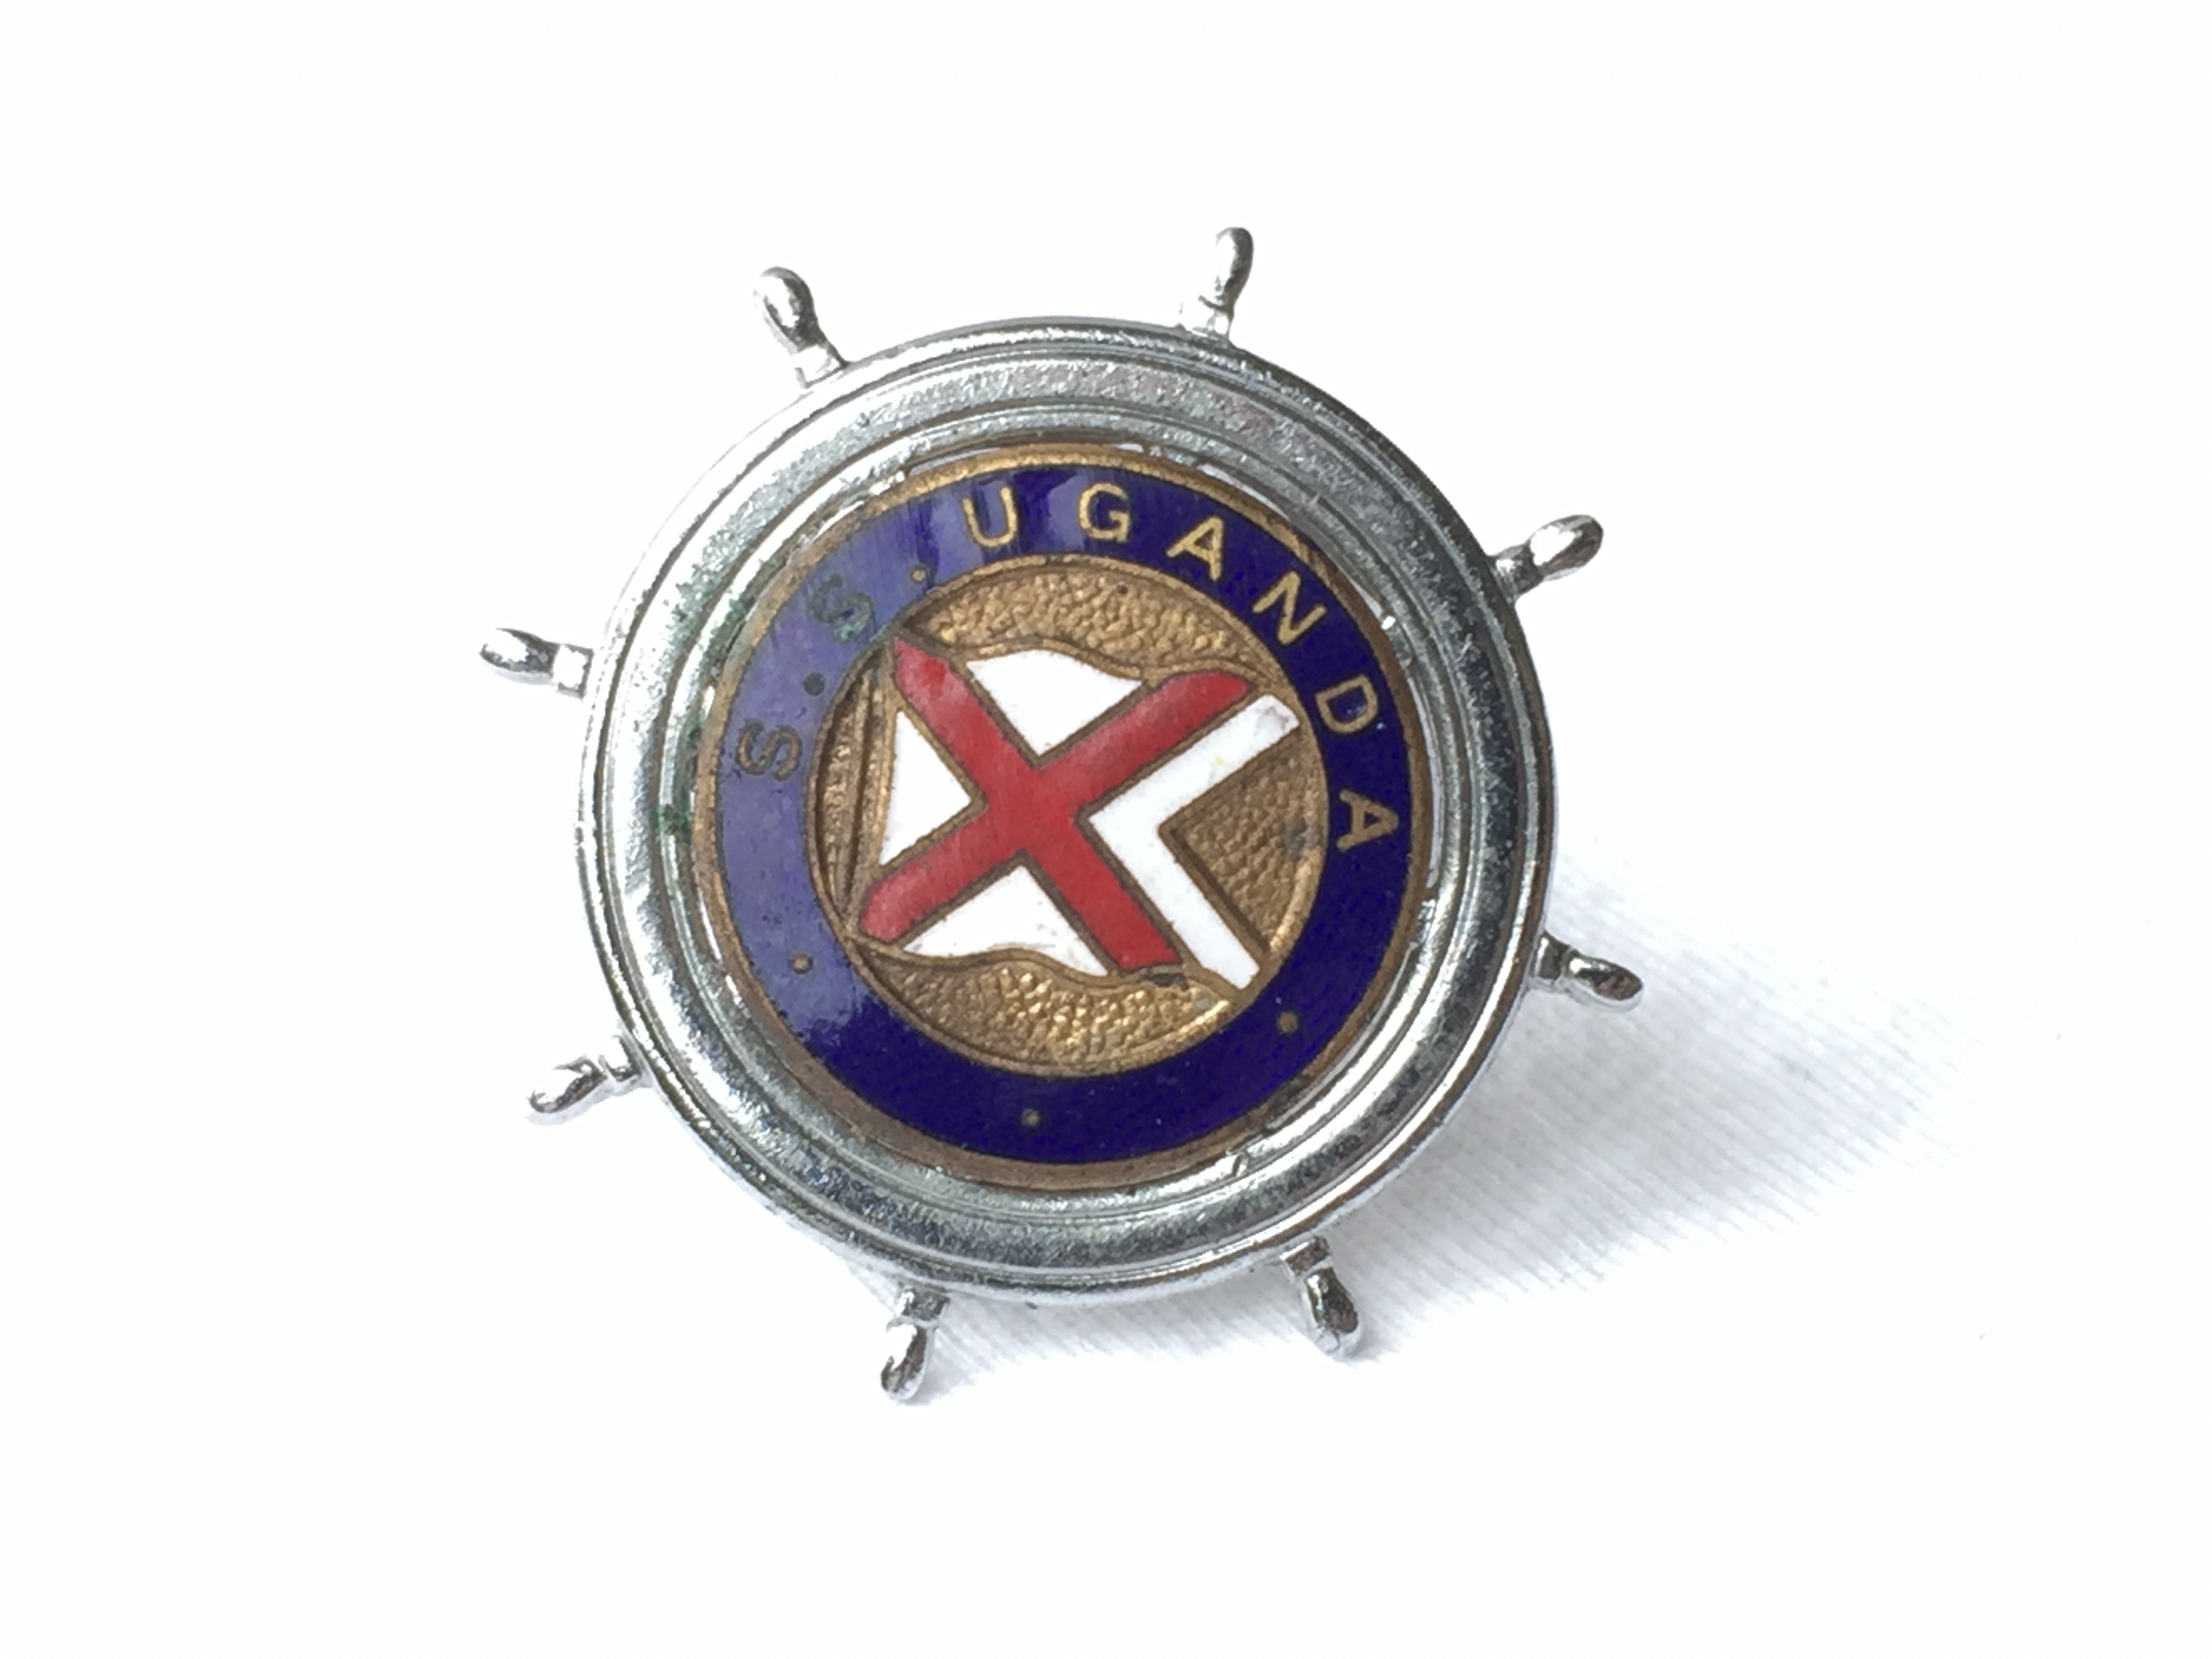 LAPEL PIN BADGE FROM THE BRITISH INDIA STEAM NAVIGATION COMPANY LINE VESSEL THE SS UGANDA 1947-1983